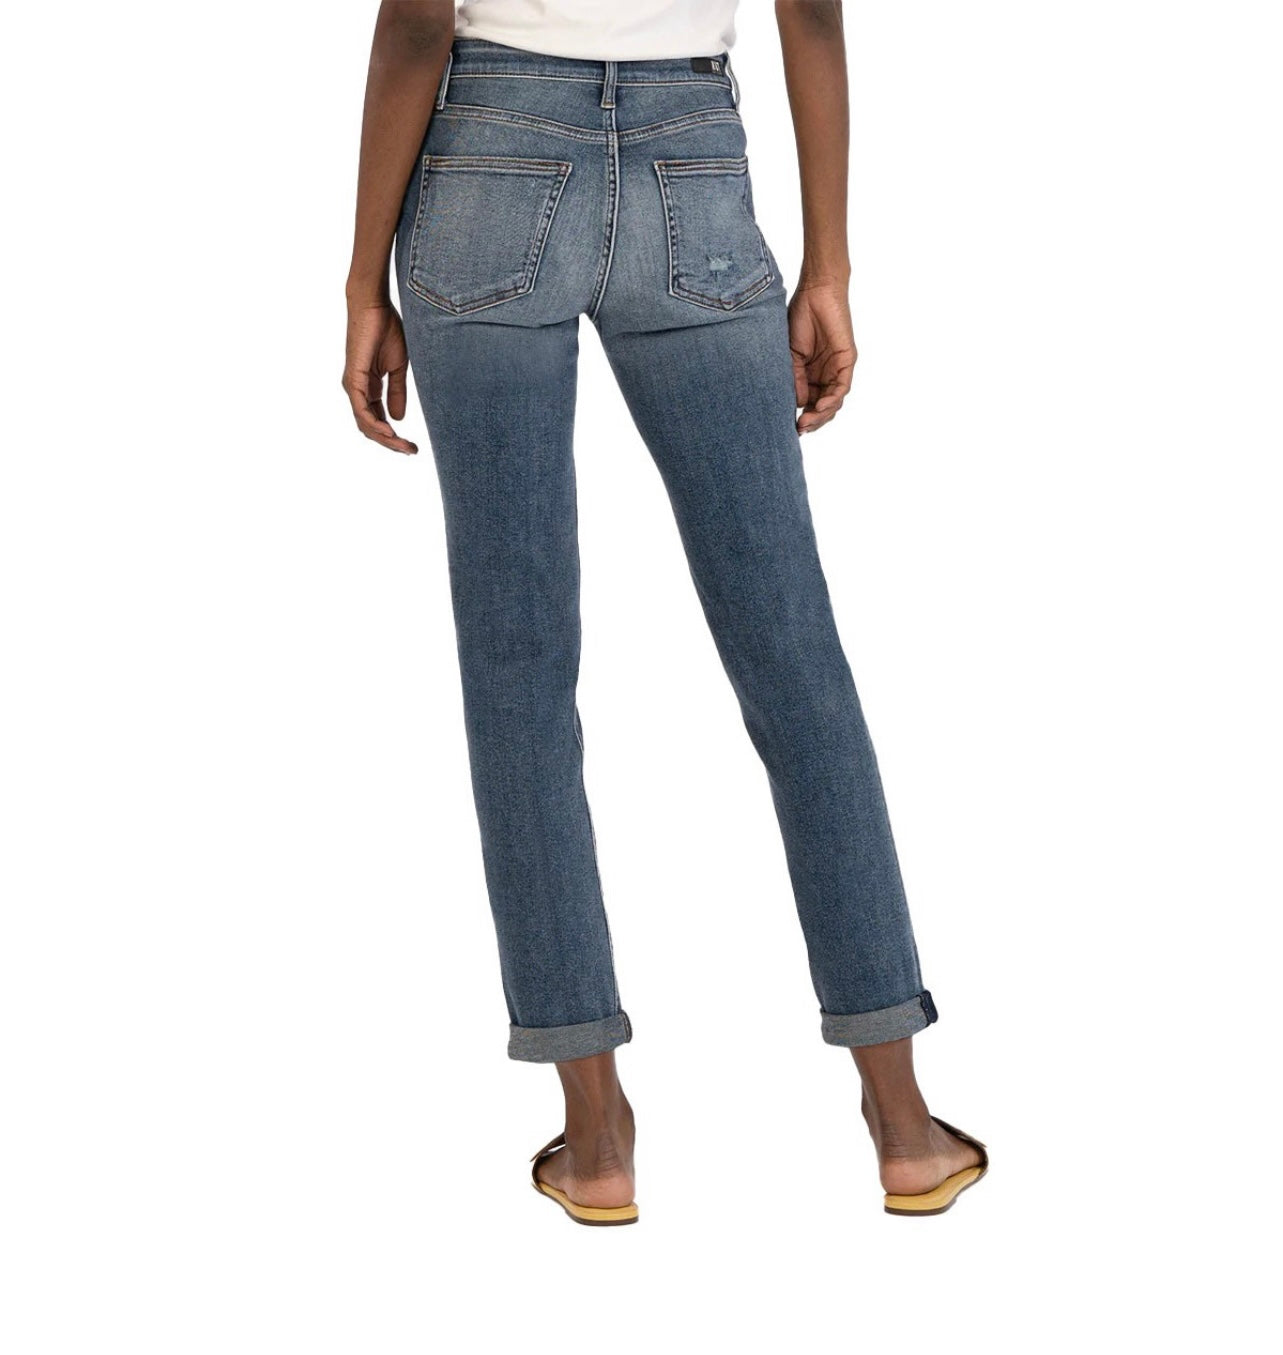 Rachael Fab AB Mom Jeans (Cleanse Wash) Fall-Winter Kut from the Kloth